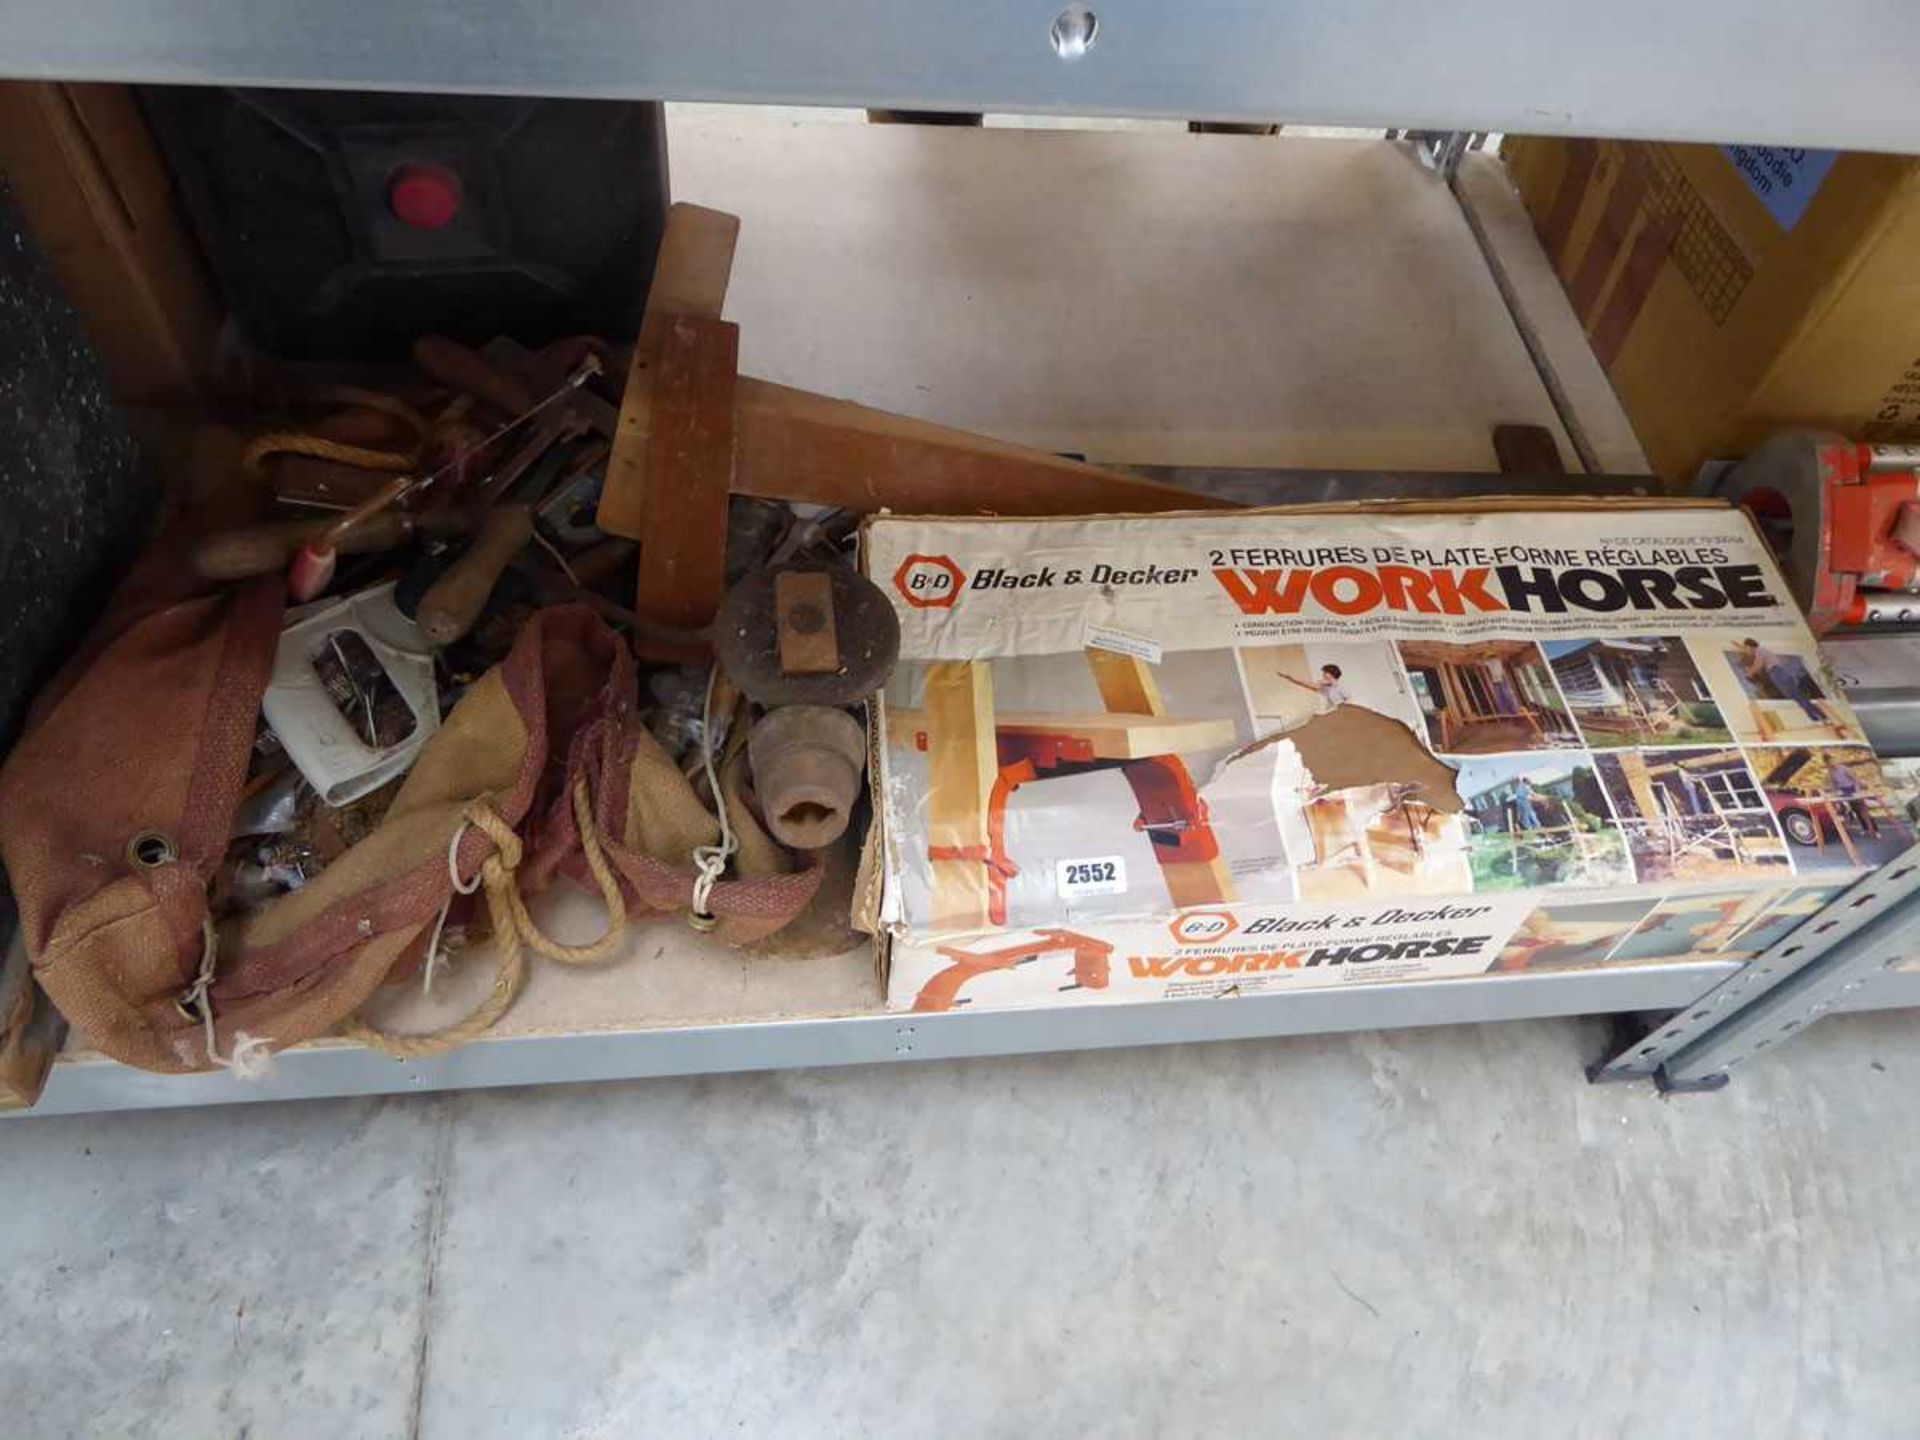 Boxed Black & Decker workhorse, together with a sack of mixed tooling